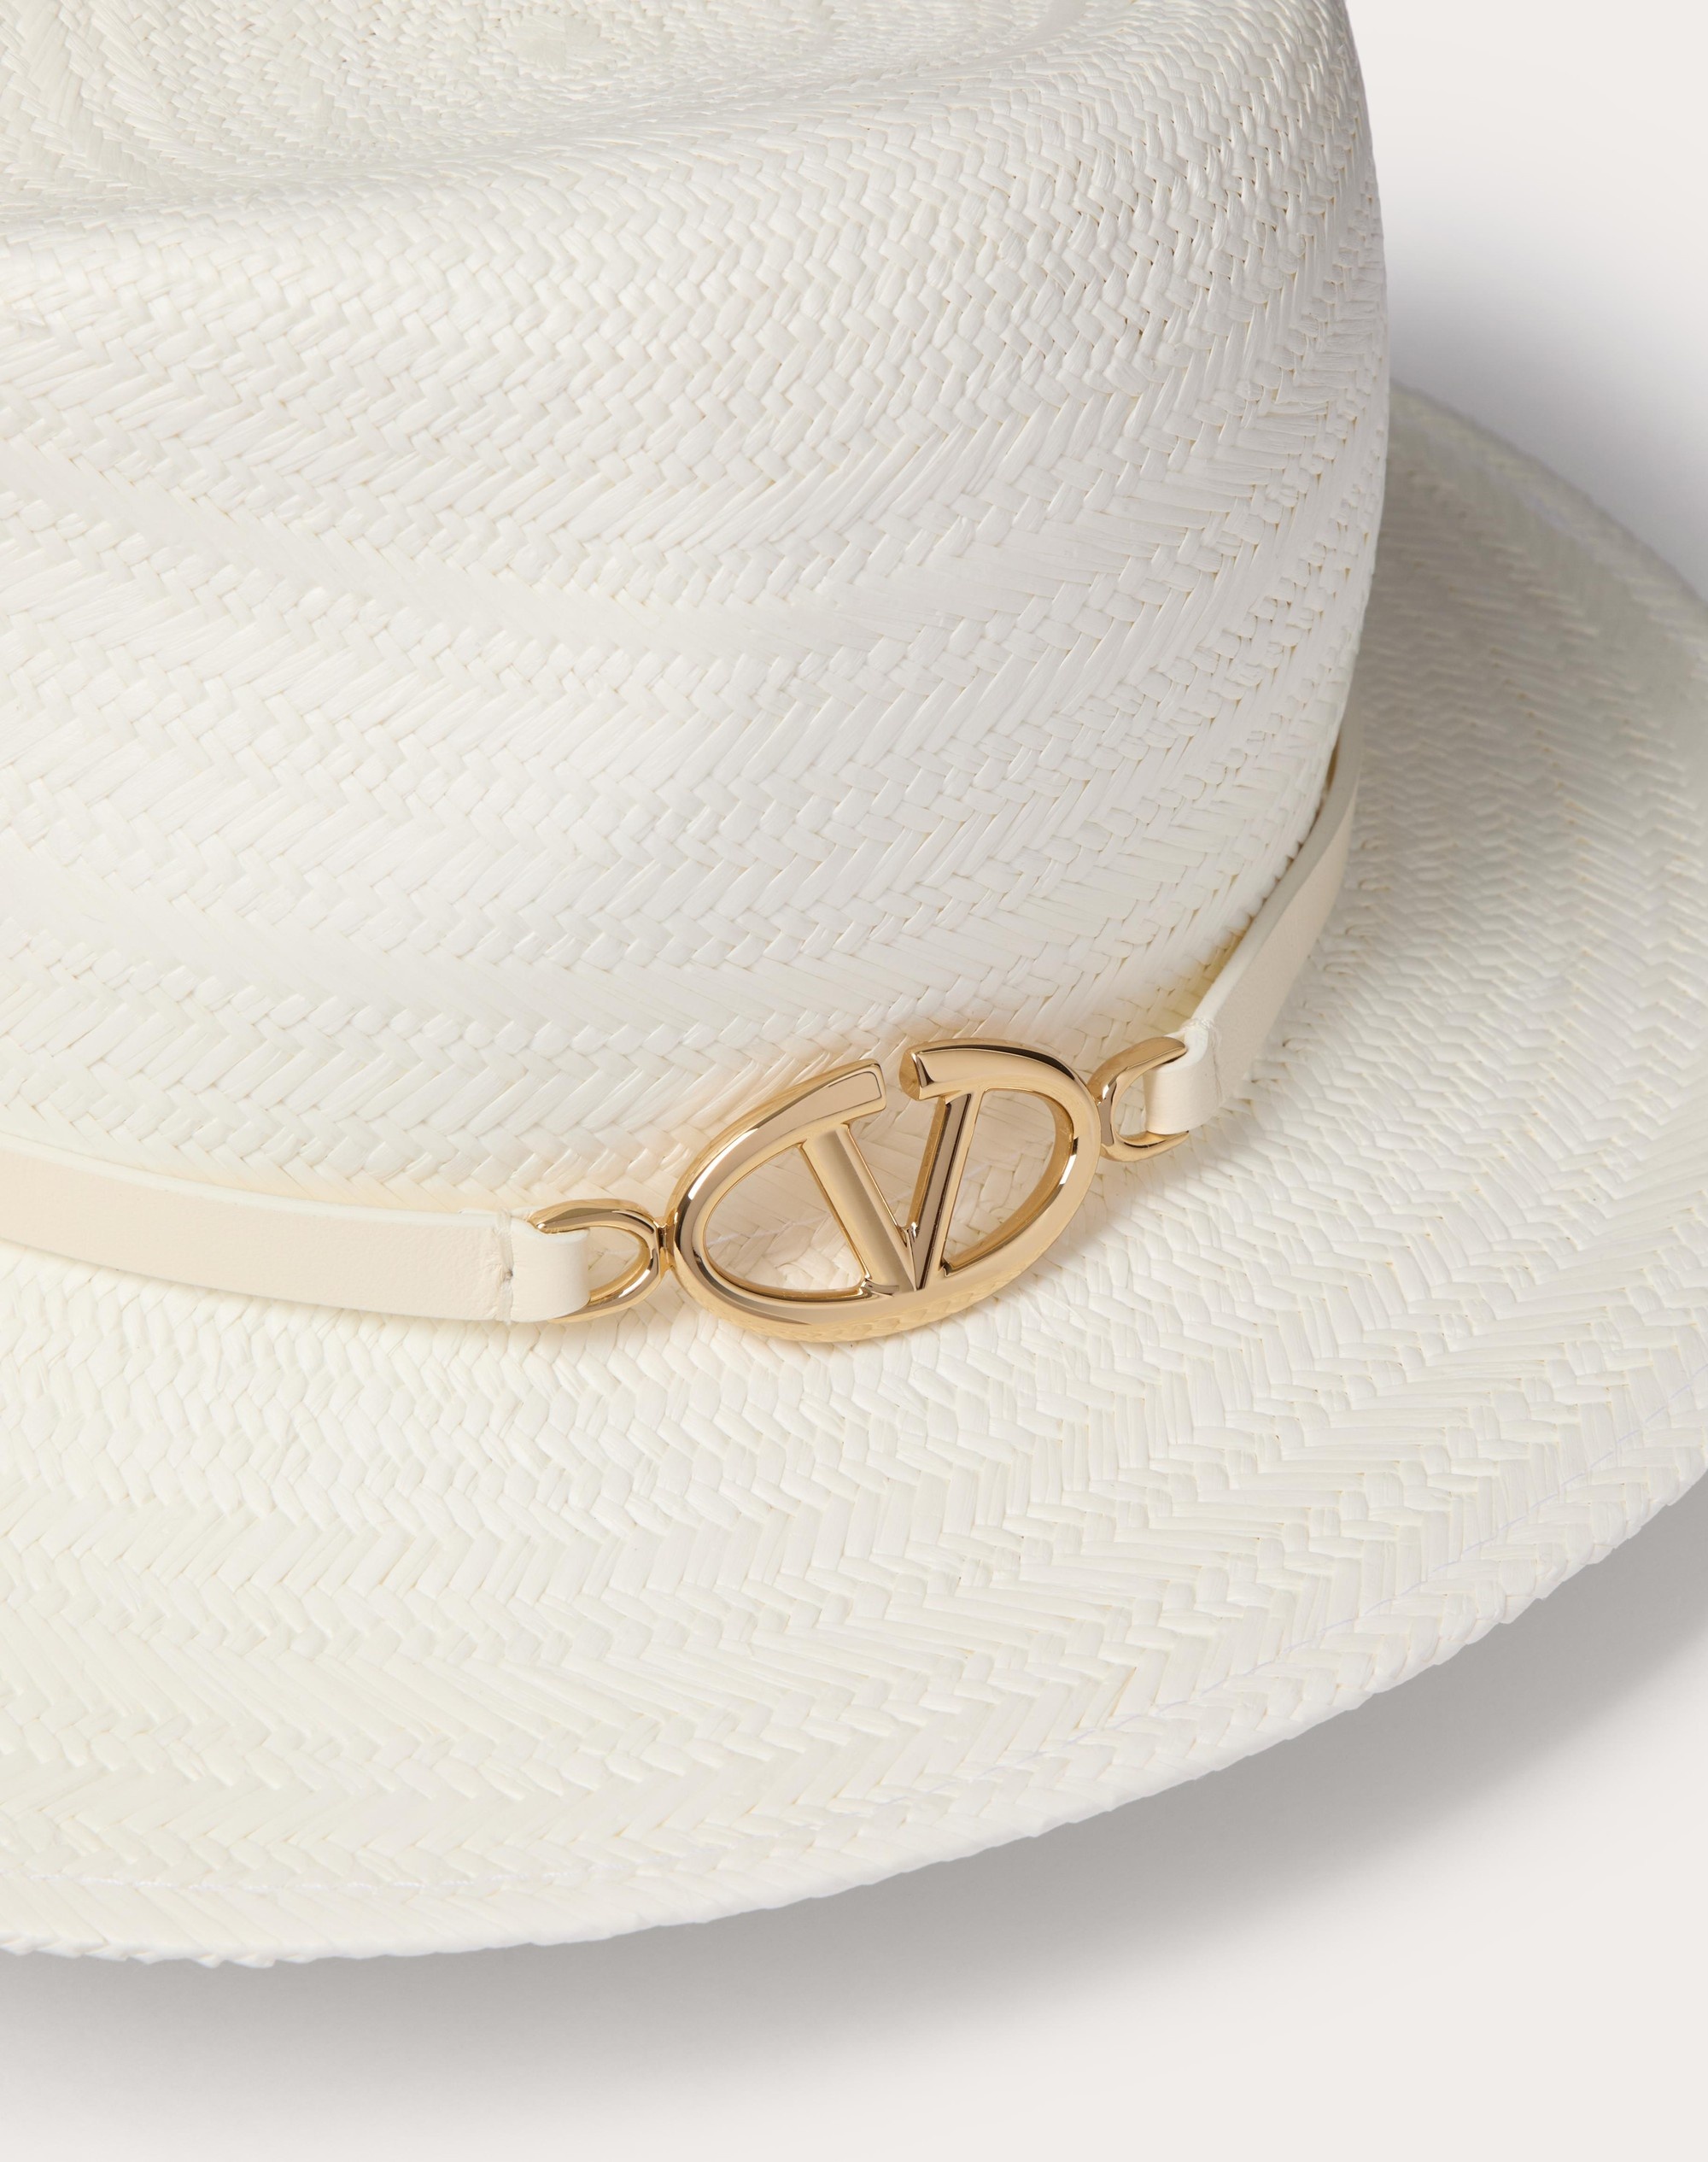 THE BOLD EDITION VLOGO WOVEN PANAMA FEDORA HAT WITH METAL DETAIL - 2